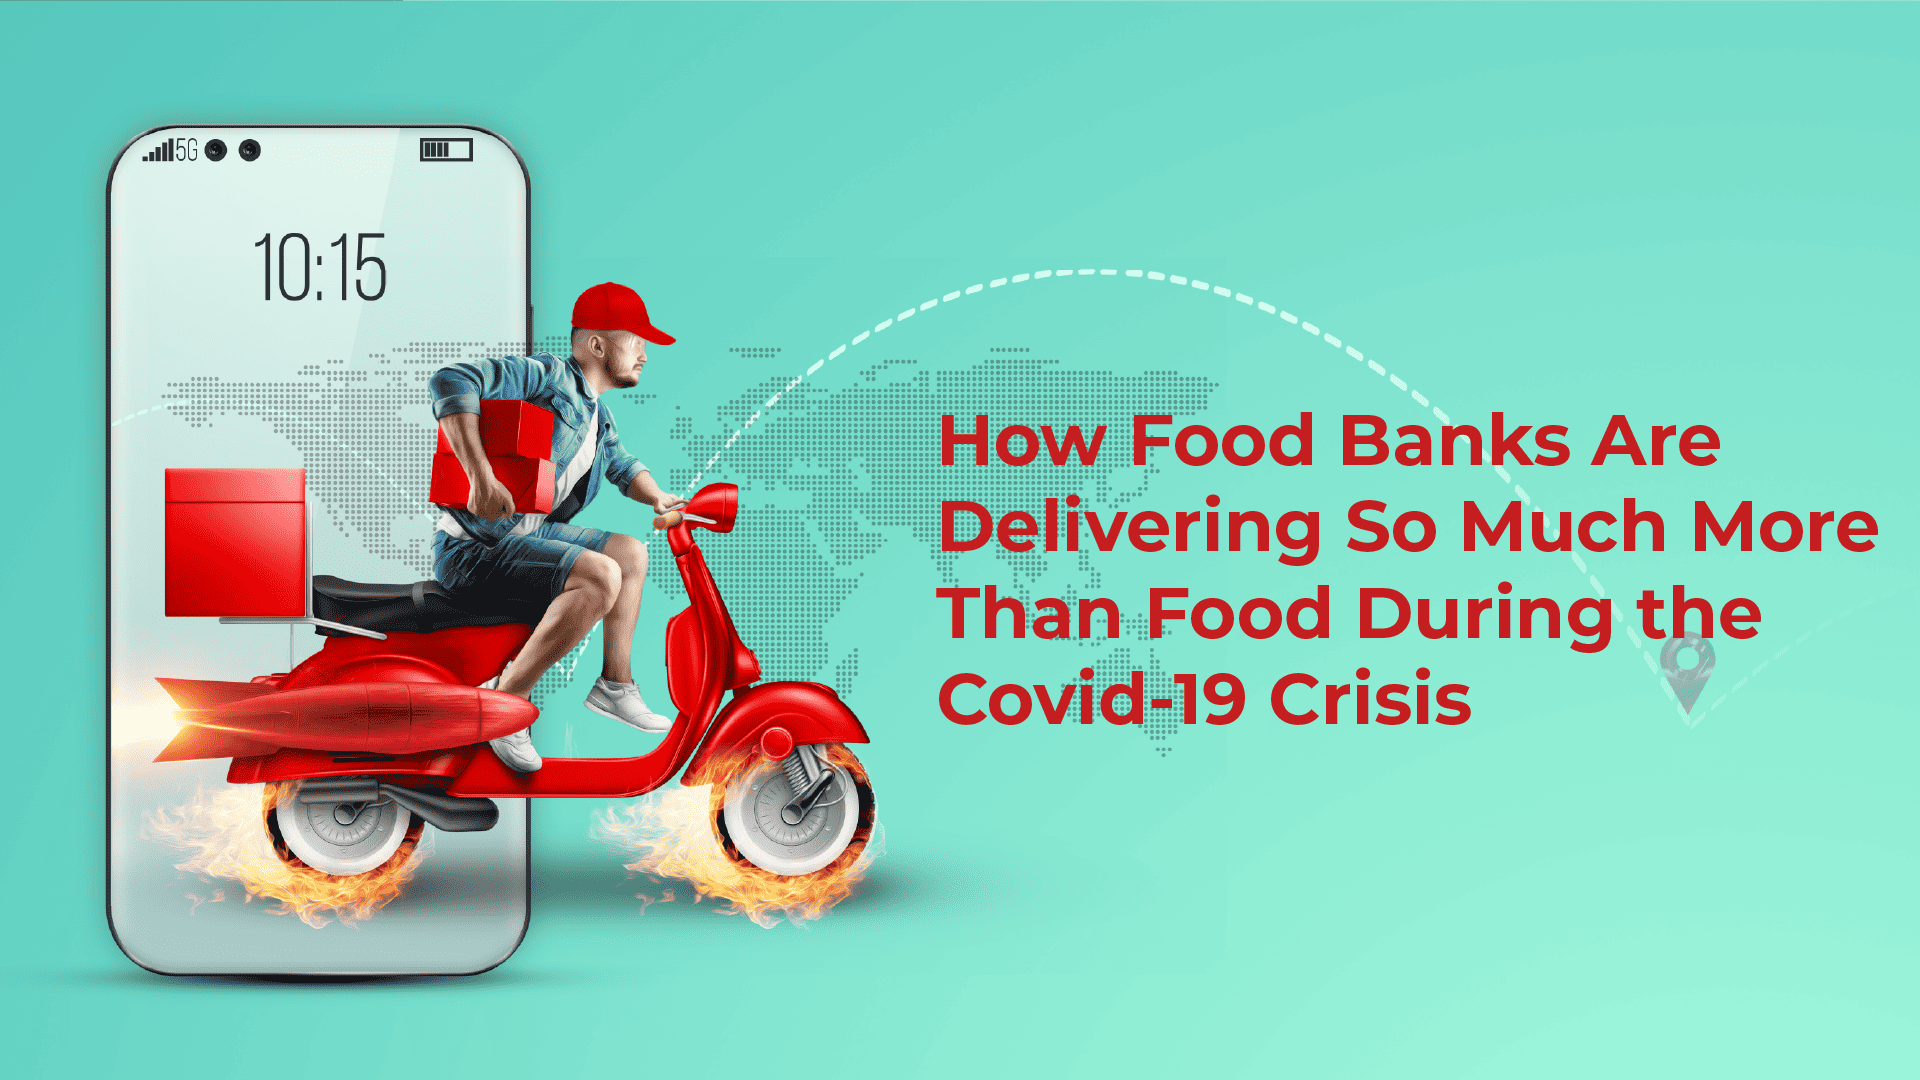 How Food Banks Are Delivering So Much More  Than Food During the Covid-19 Crisis